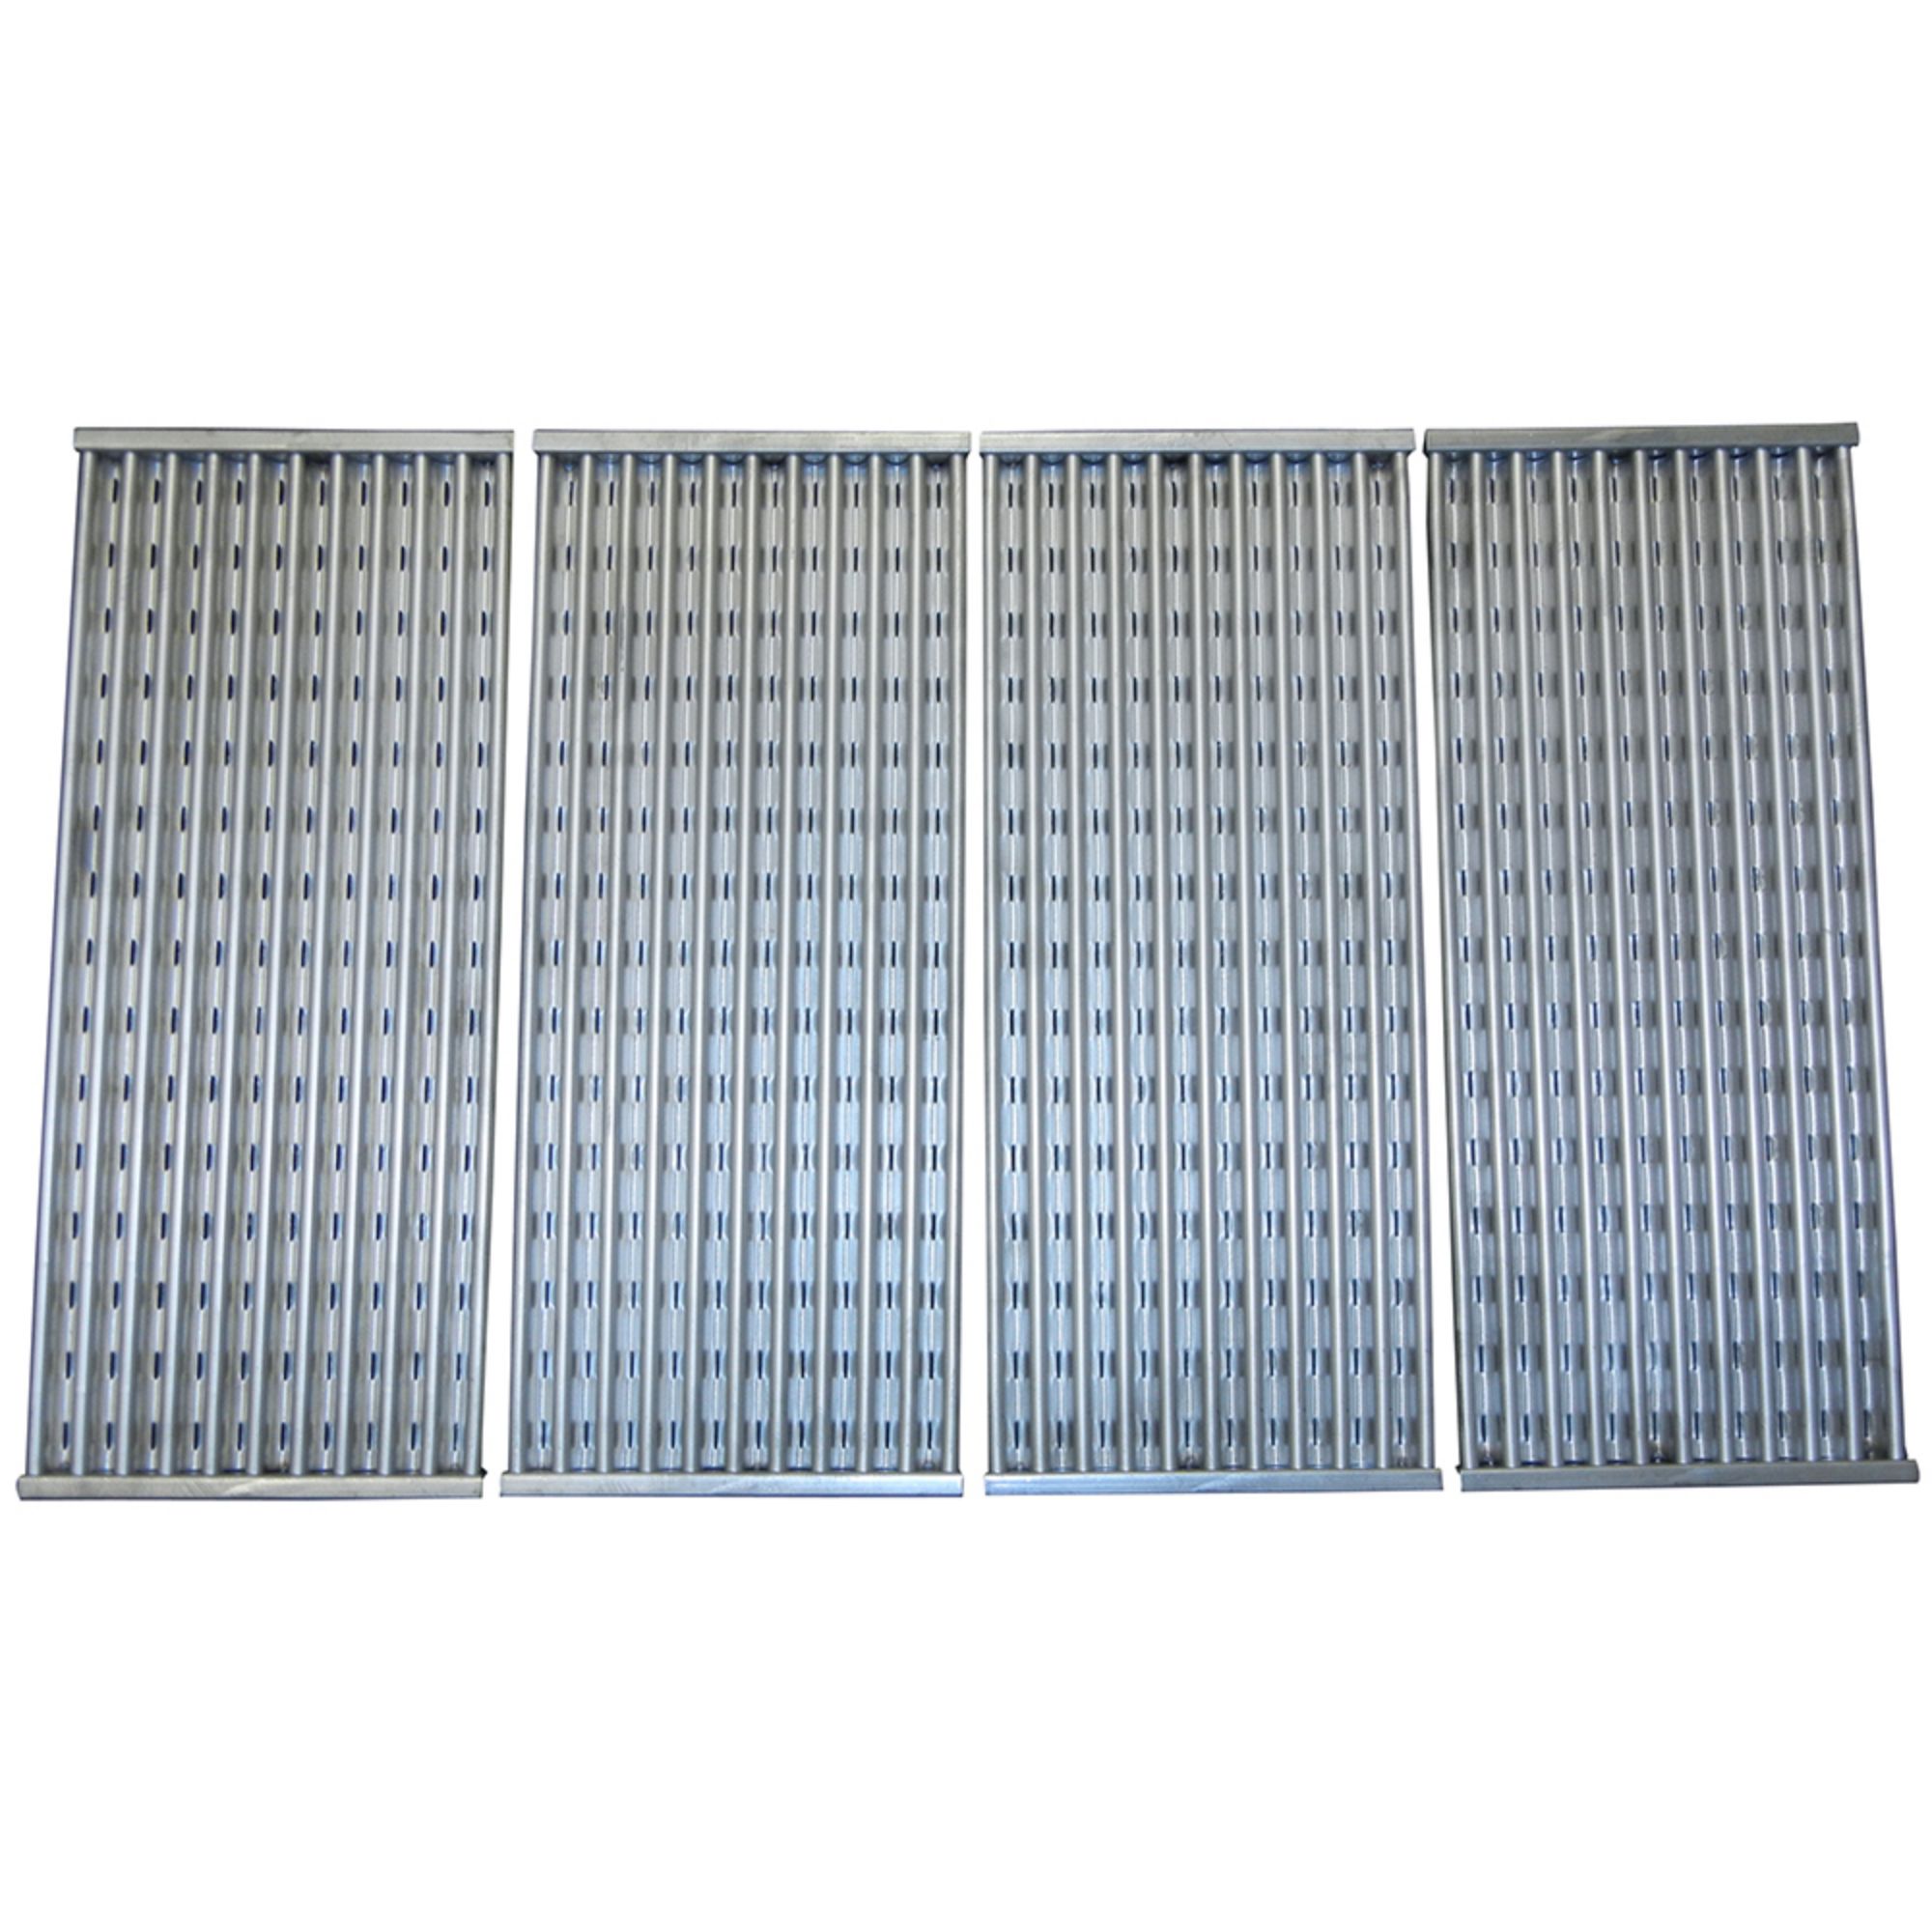 Stamped stainless steel cooking grid for Charbroil, Kenmore brand gas grills